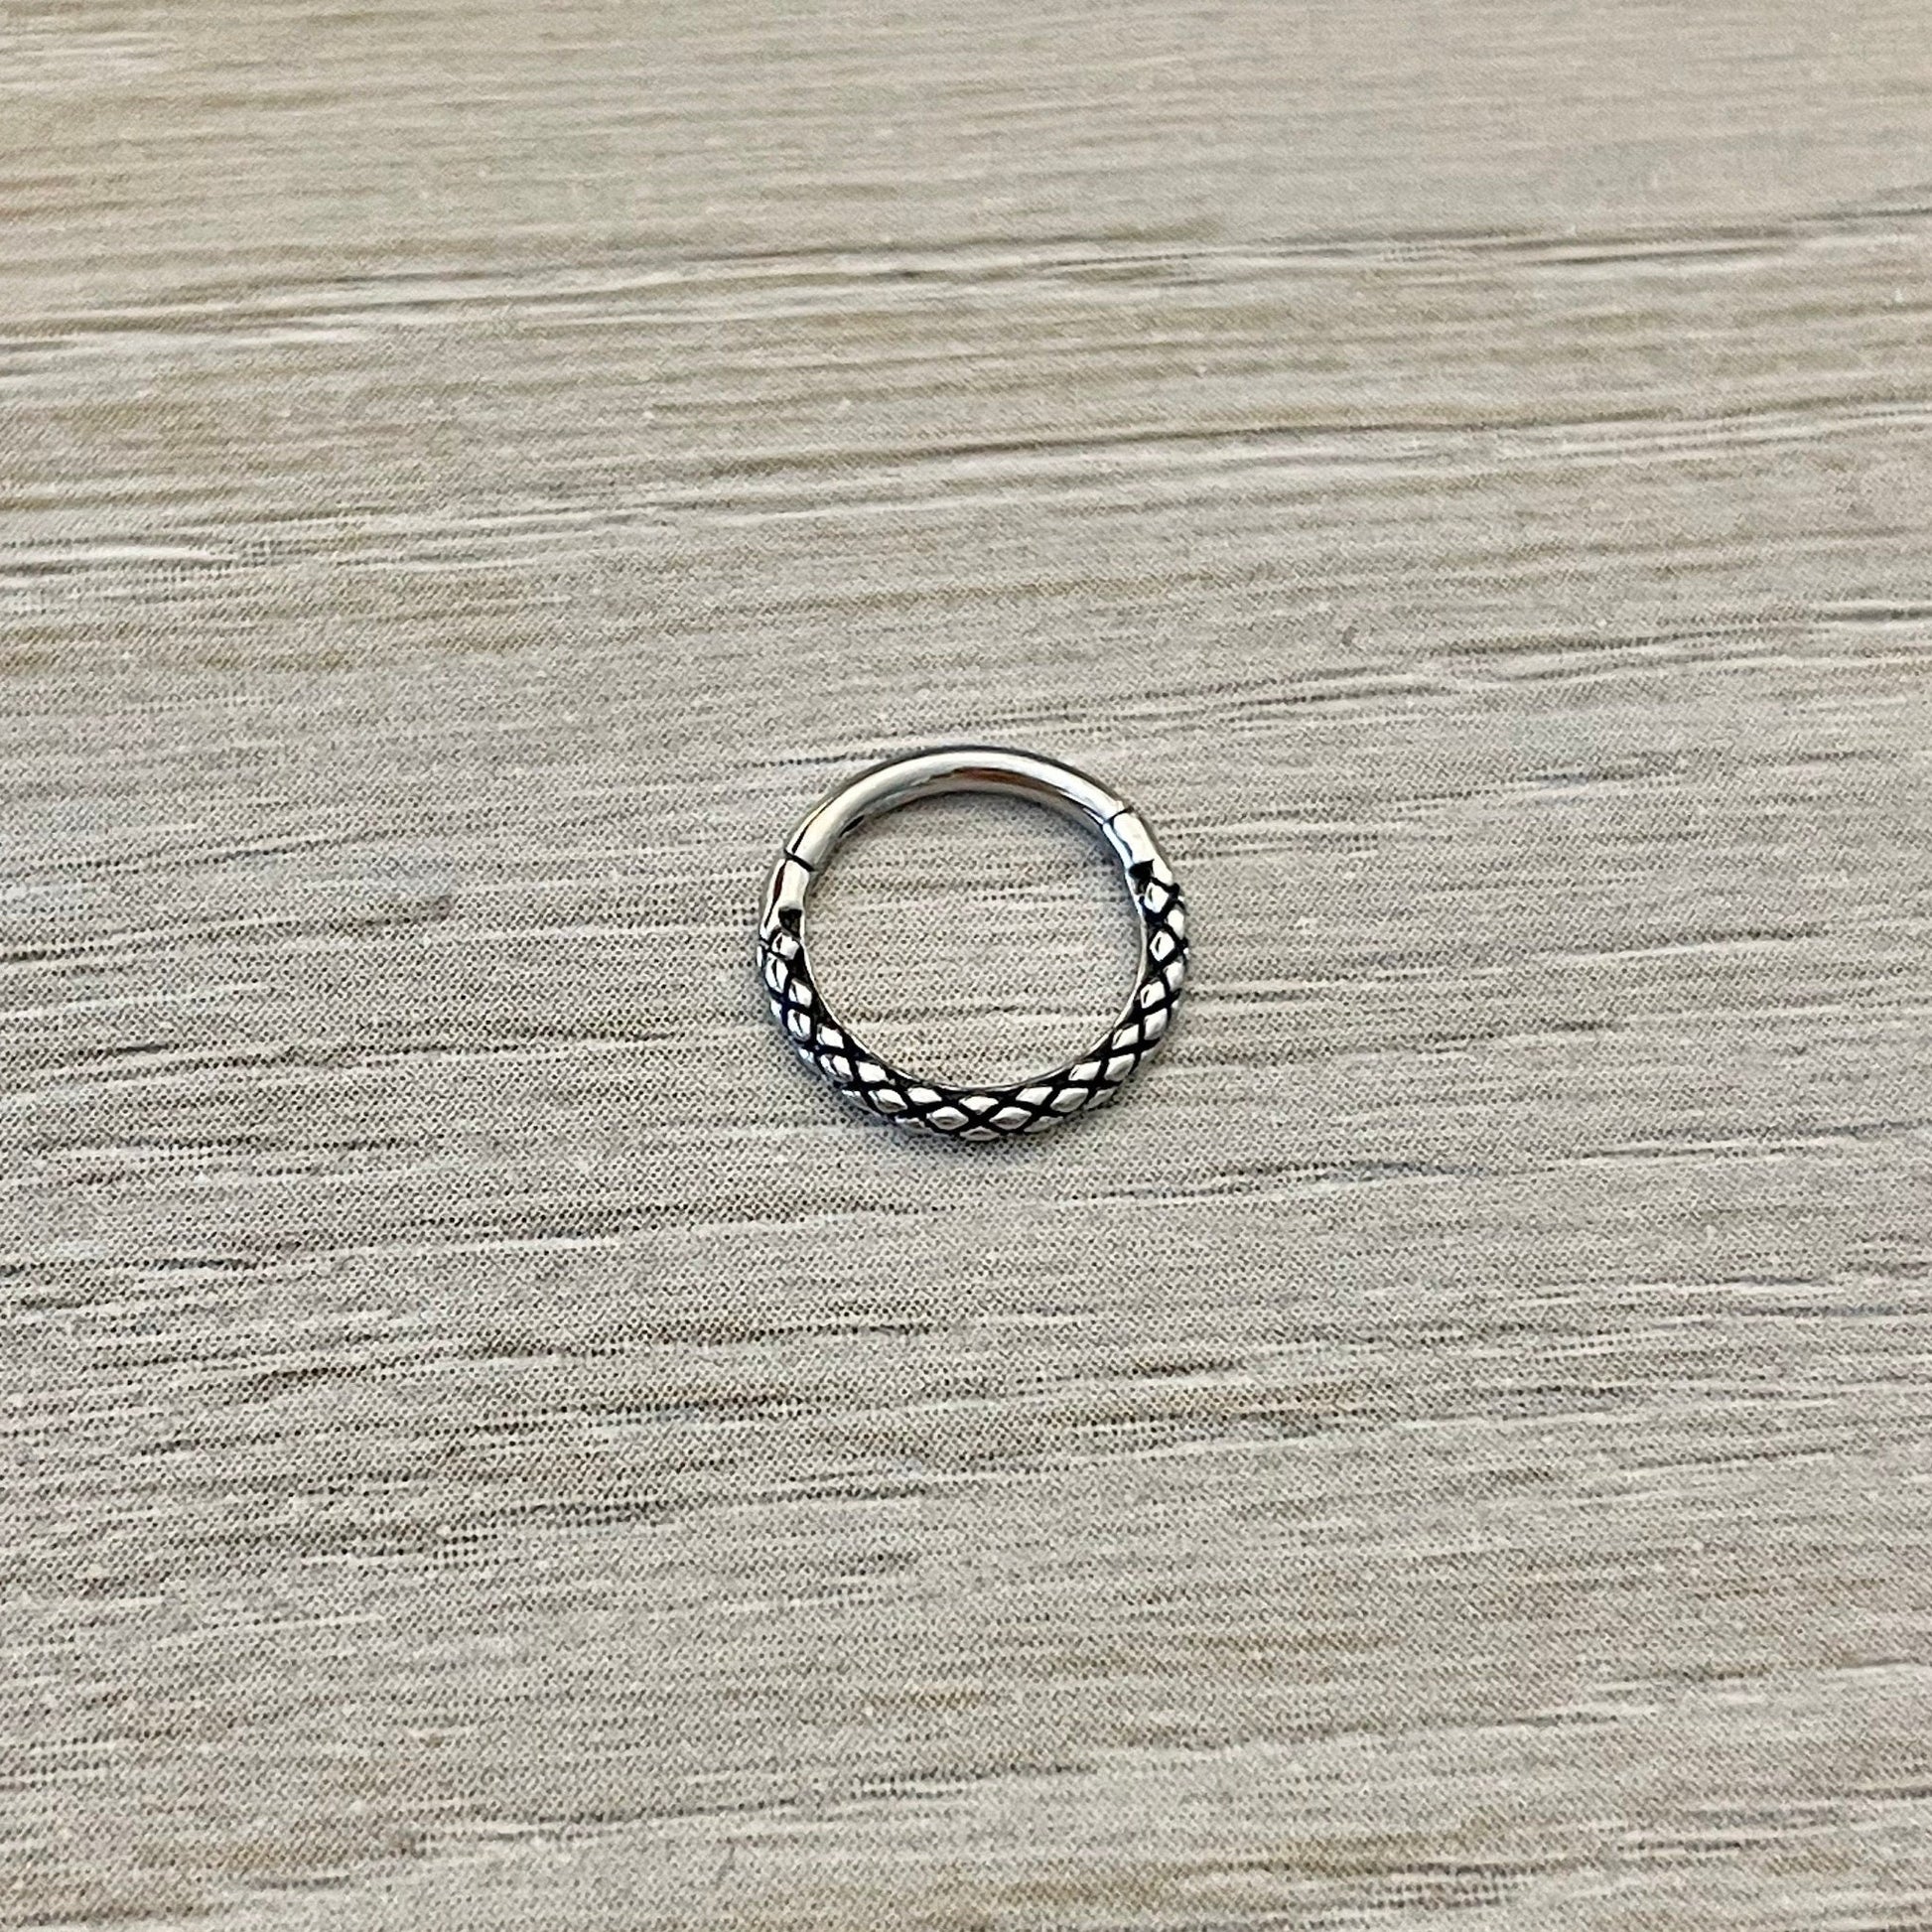 Snake Skin Septum Piercing (16G or 18G | 8mm, 10mm or 12mm | Surgical Steel | Silver or Gold Options)